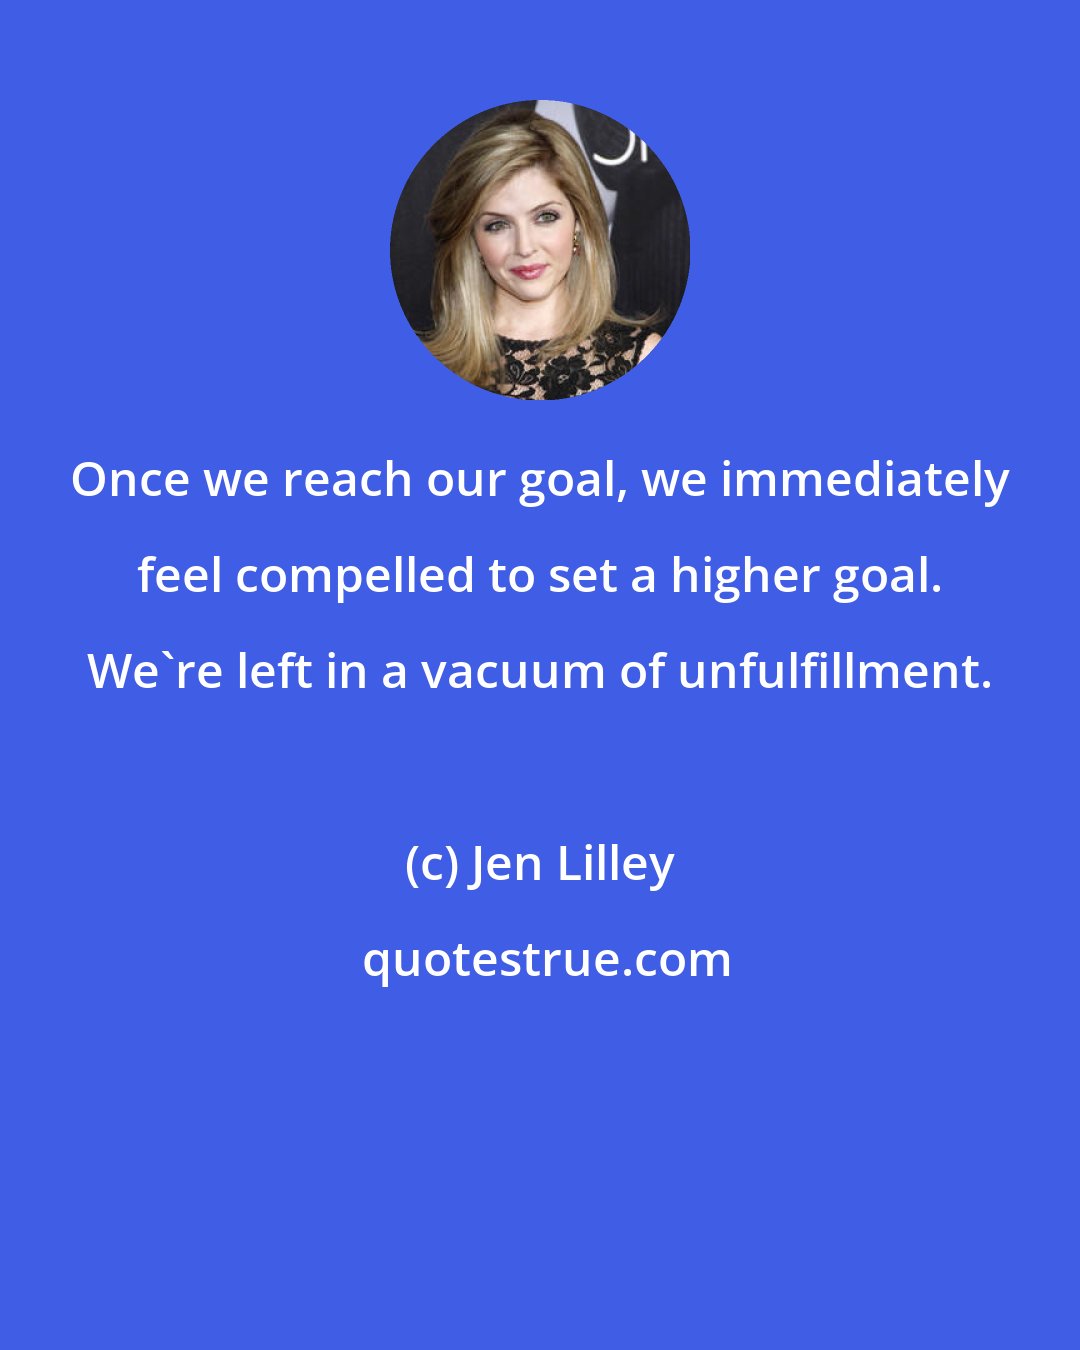 Jen Lilley: Once we reach our goal, we immediately feel compelled to set a higher goal. We're left in a vacuum of unfulfillment.